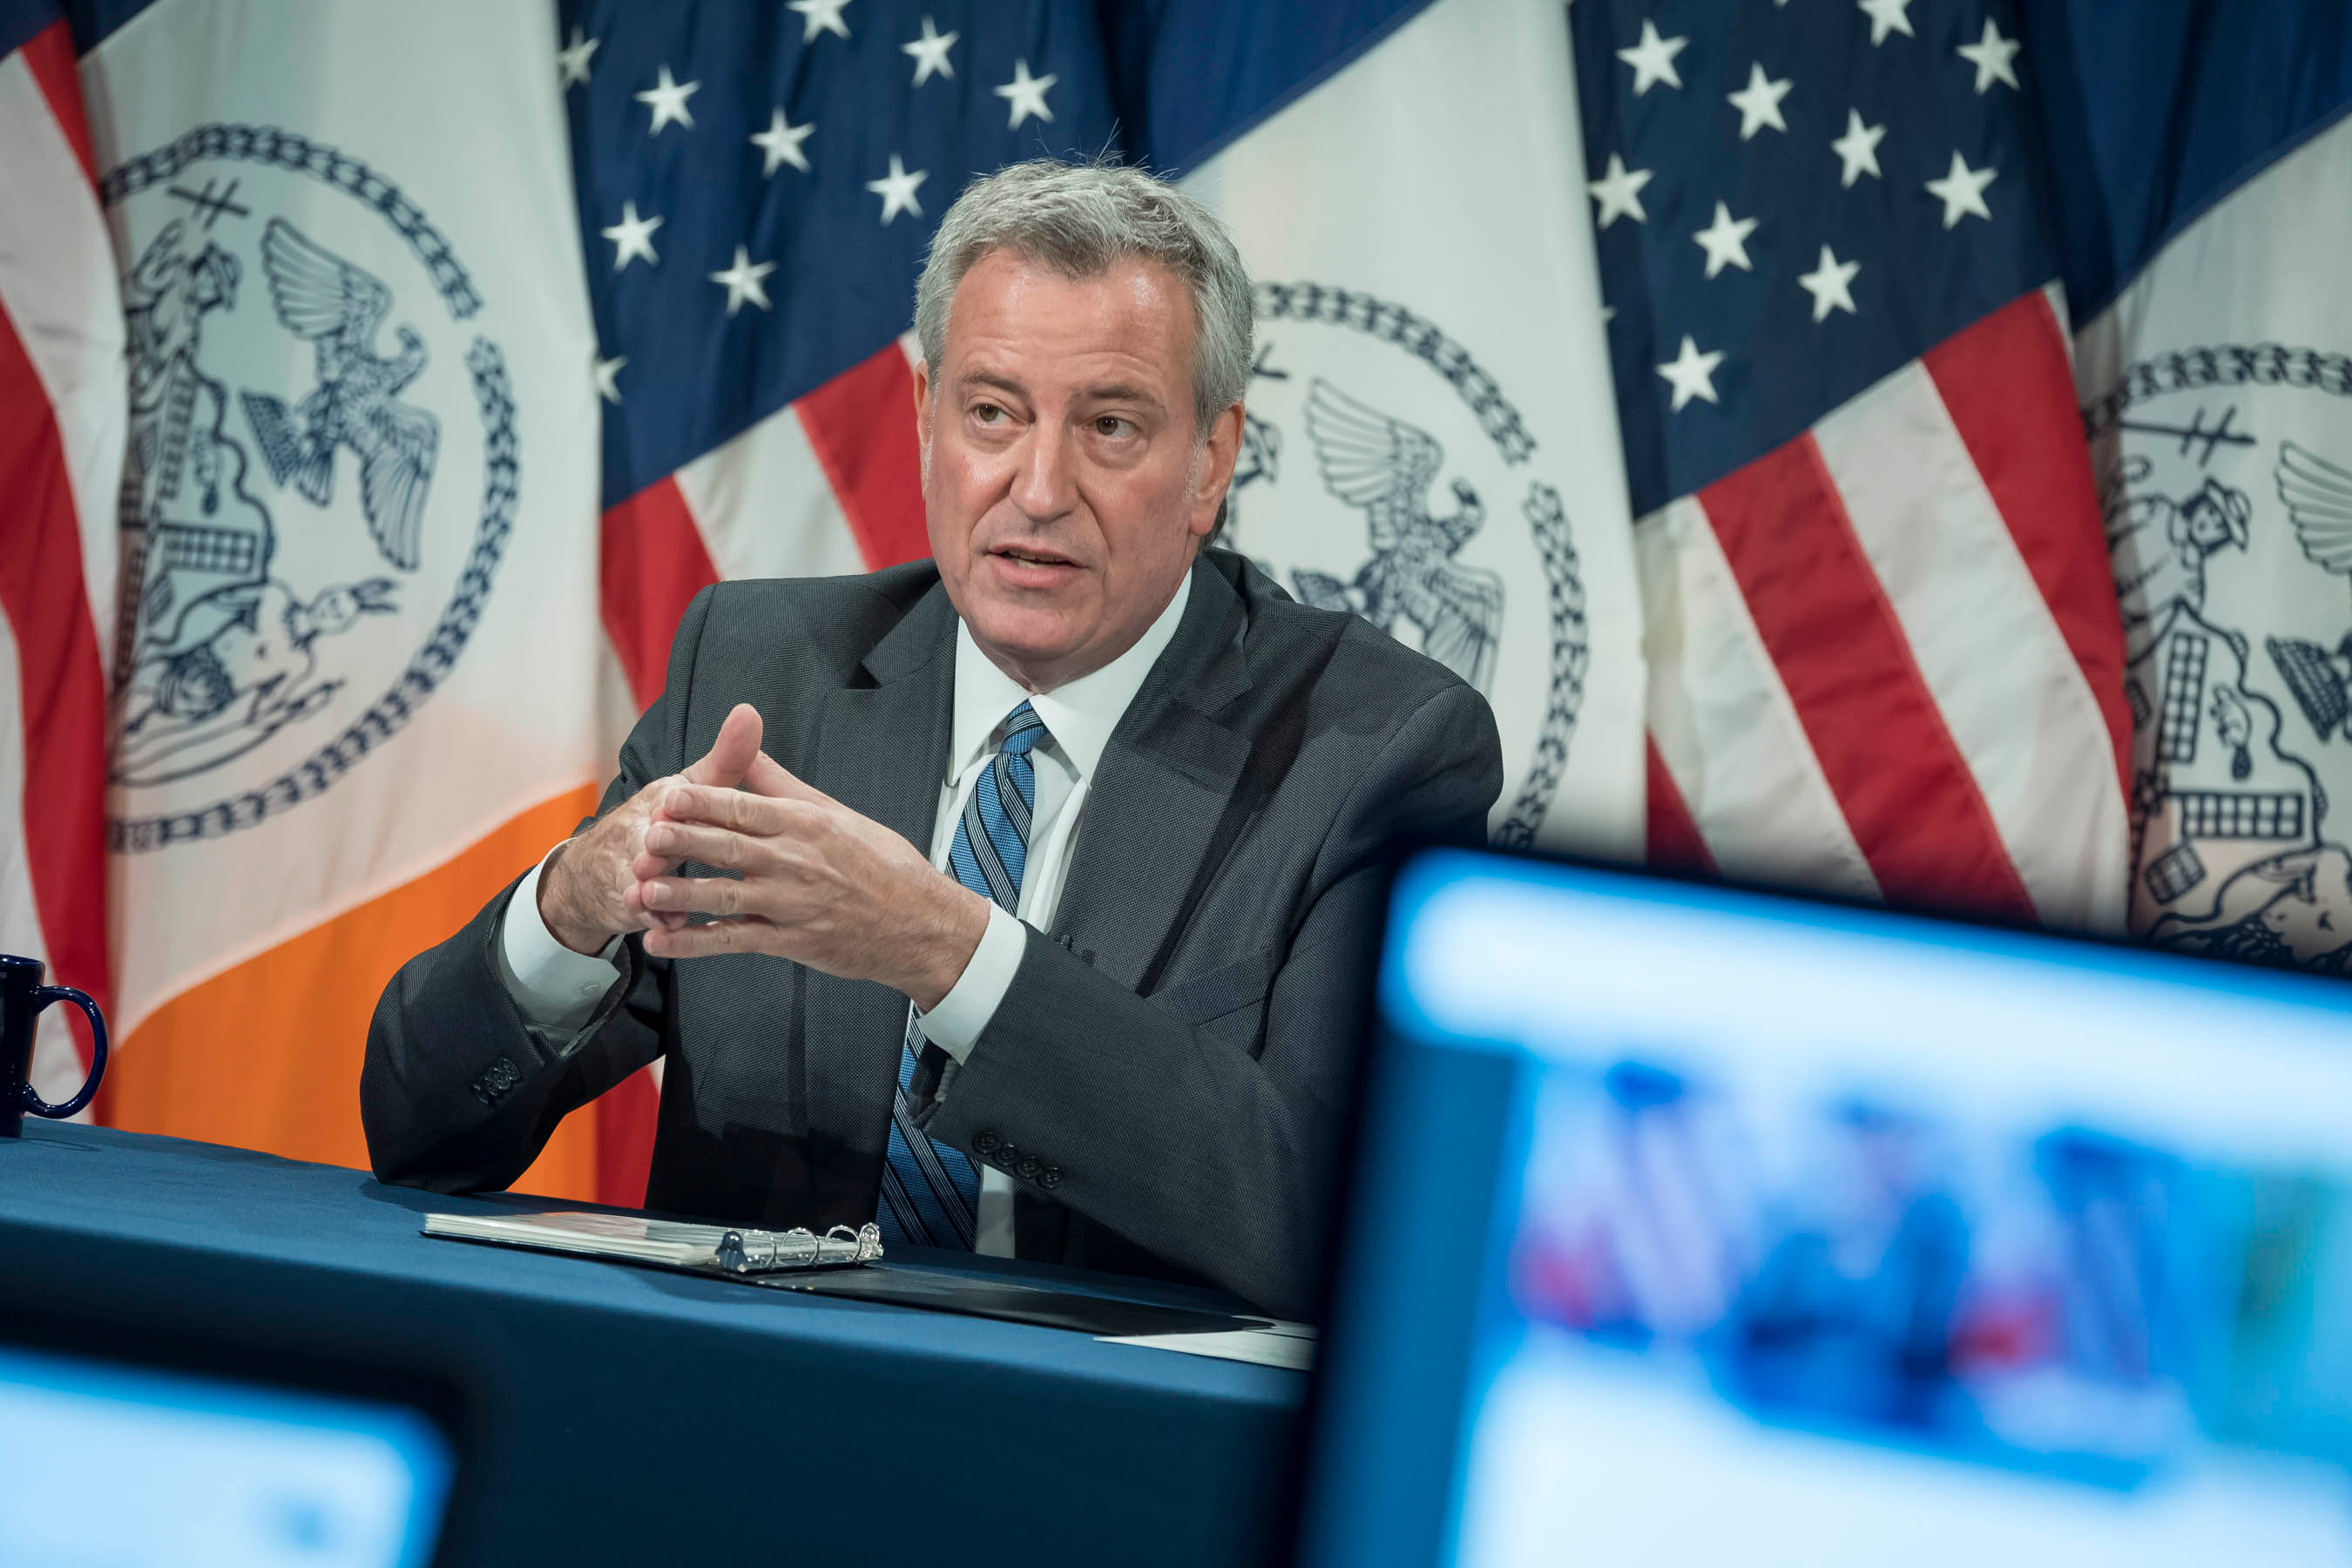 Mayor Bill de Blasio spoke about the 2020 budget during a City Hall press conference, June 30, 2020.